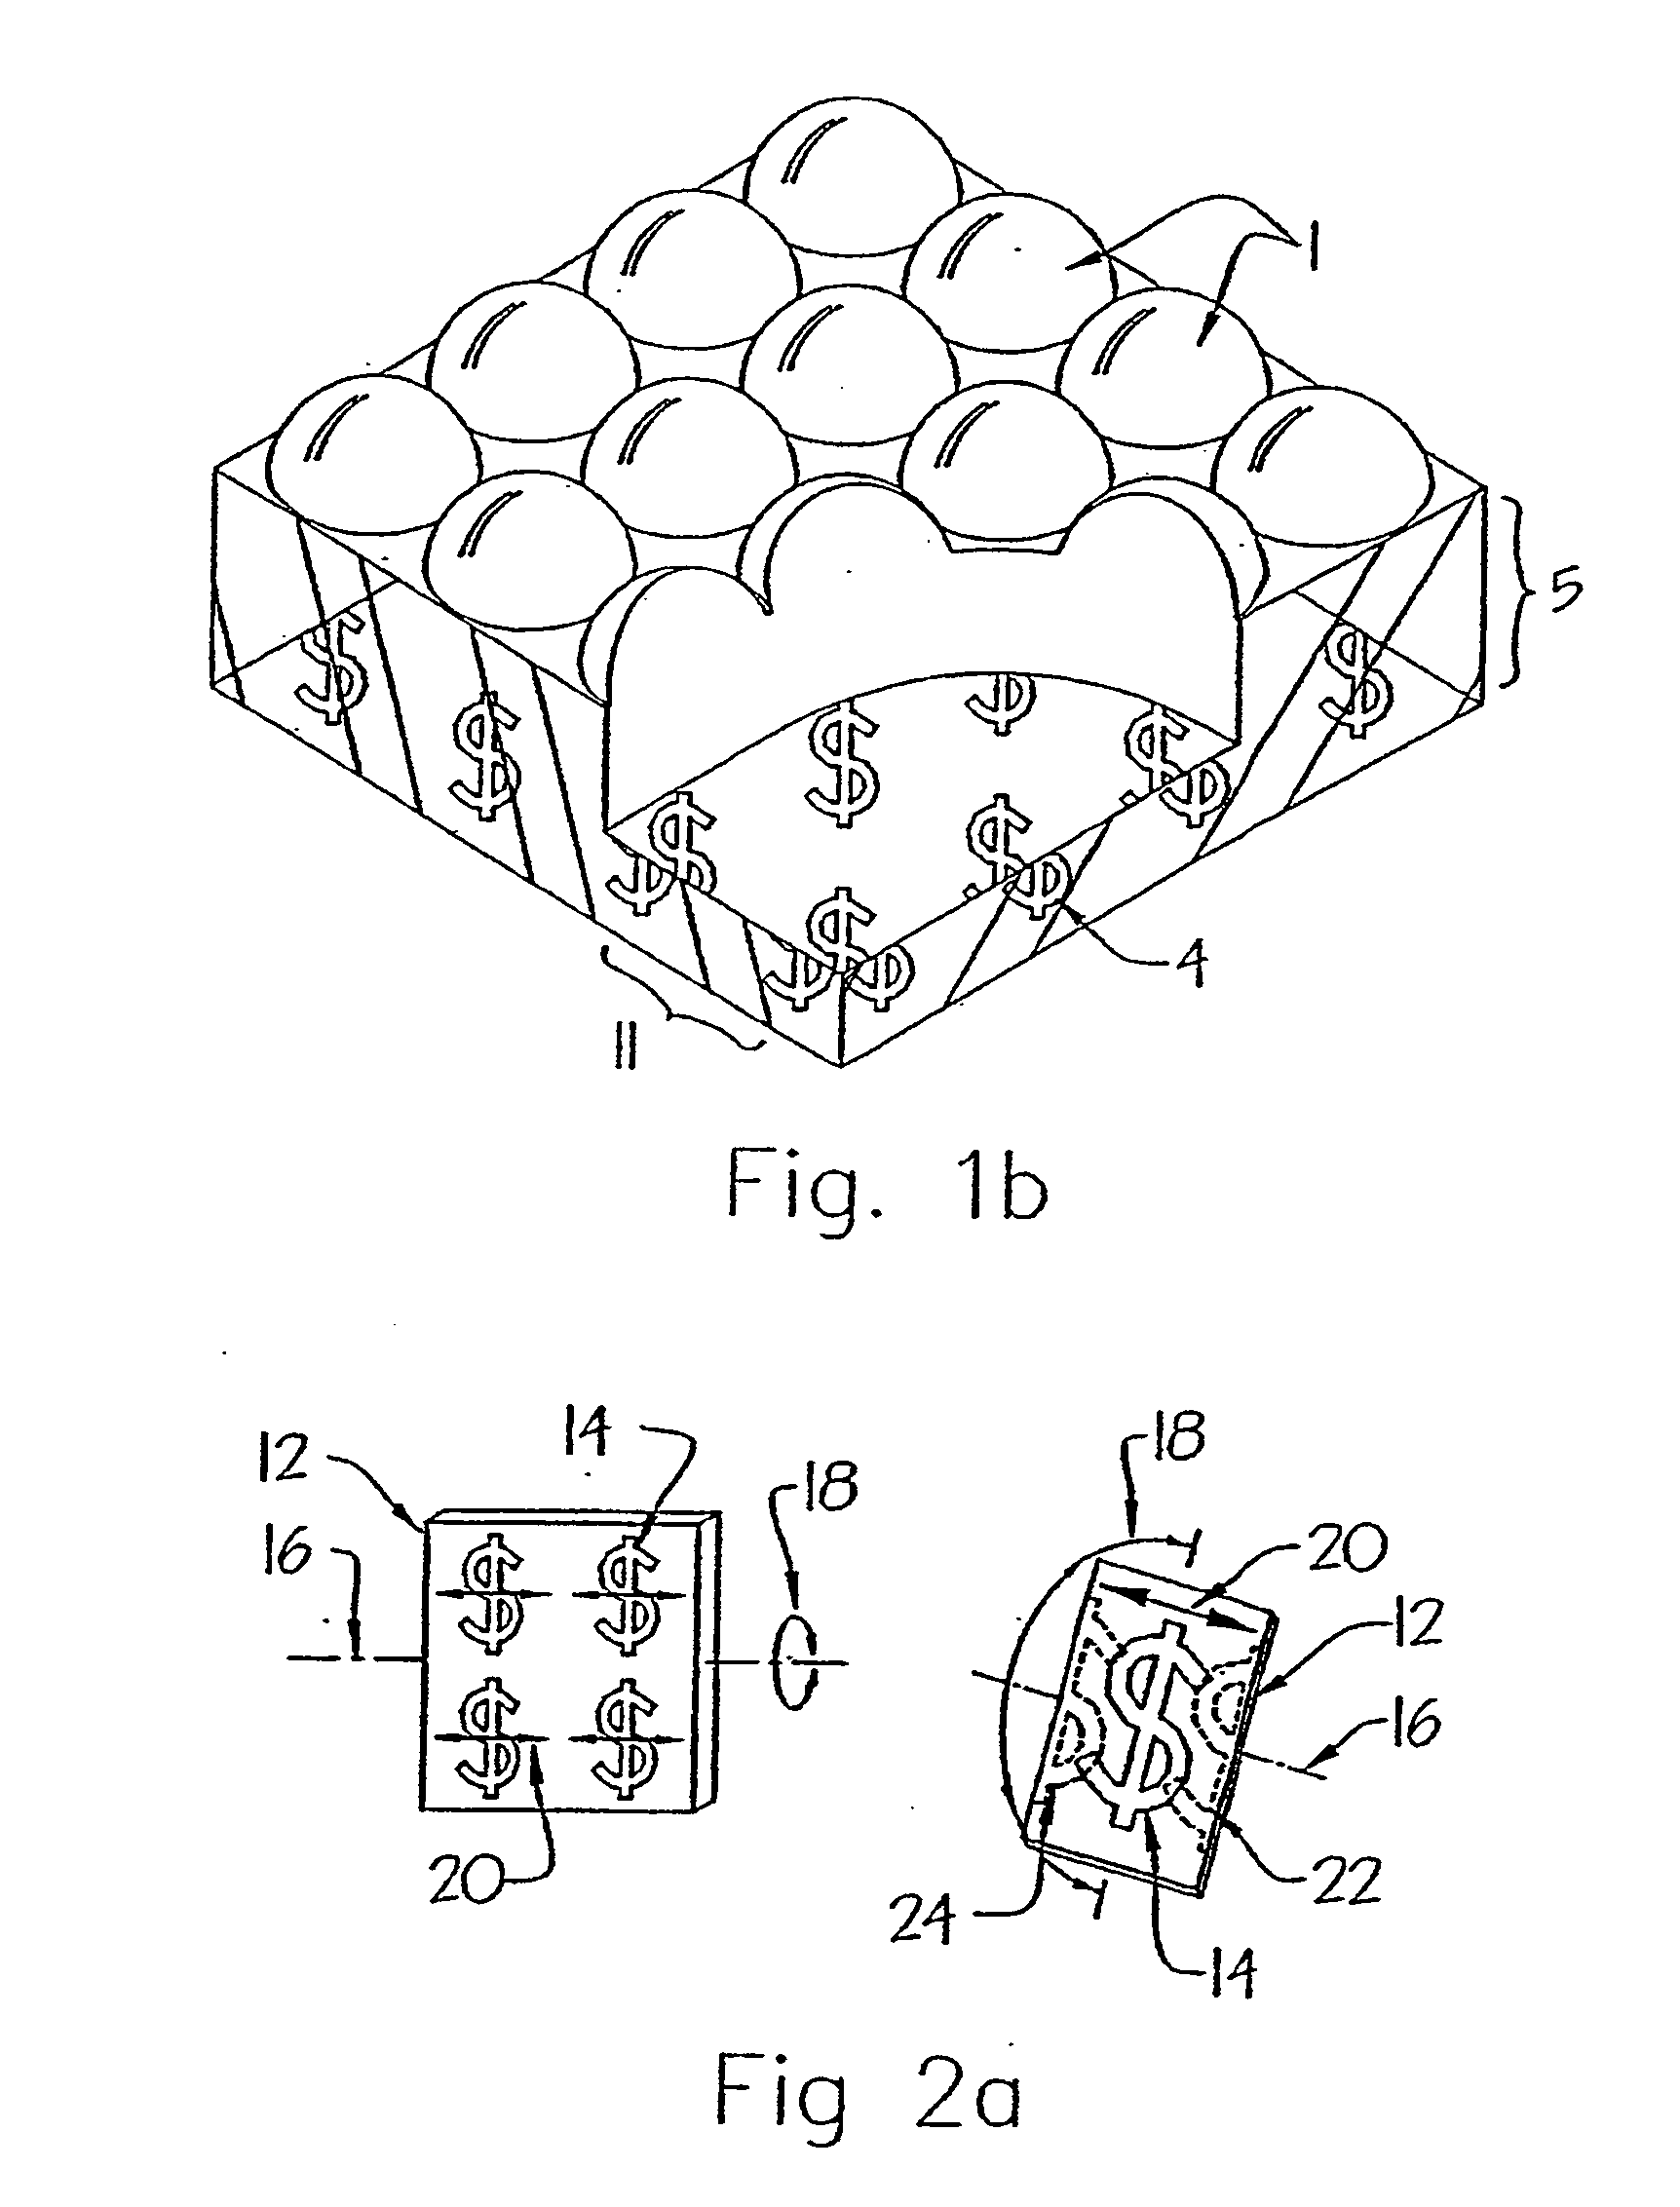 Micro-optic security and image presentation system presenting a synthetically magnified image that appears to lie above a given plane